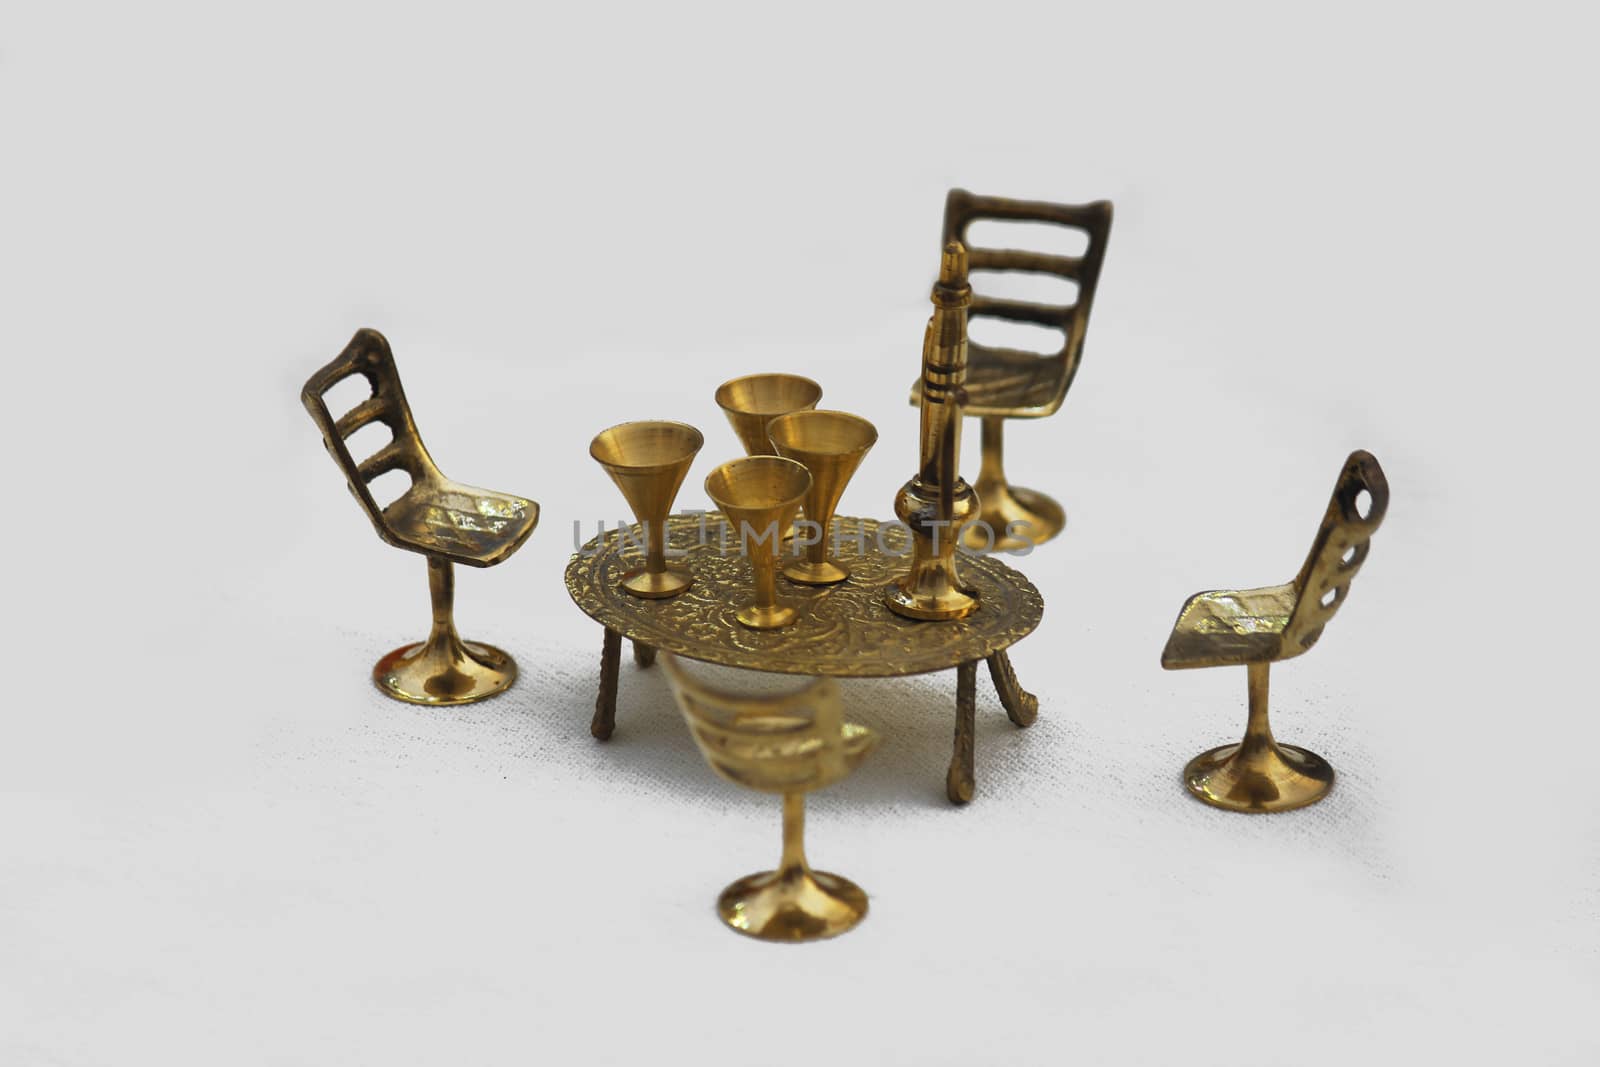 Antique Miniature Brass Made Dinning Table by yands